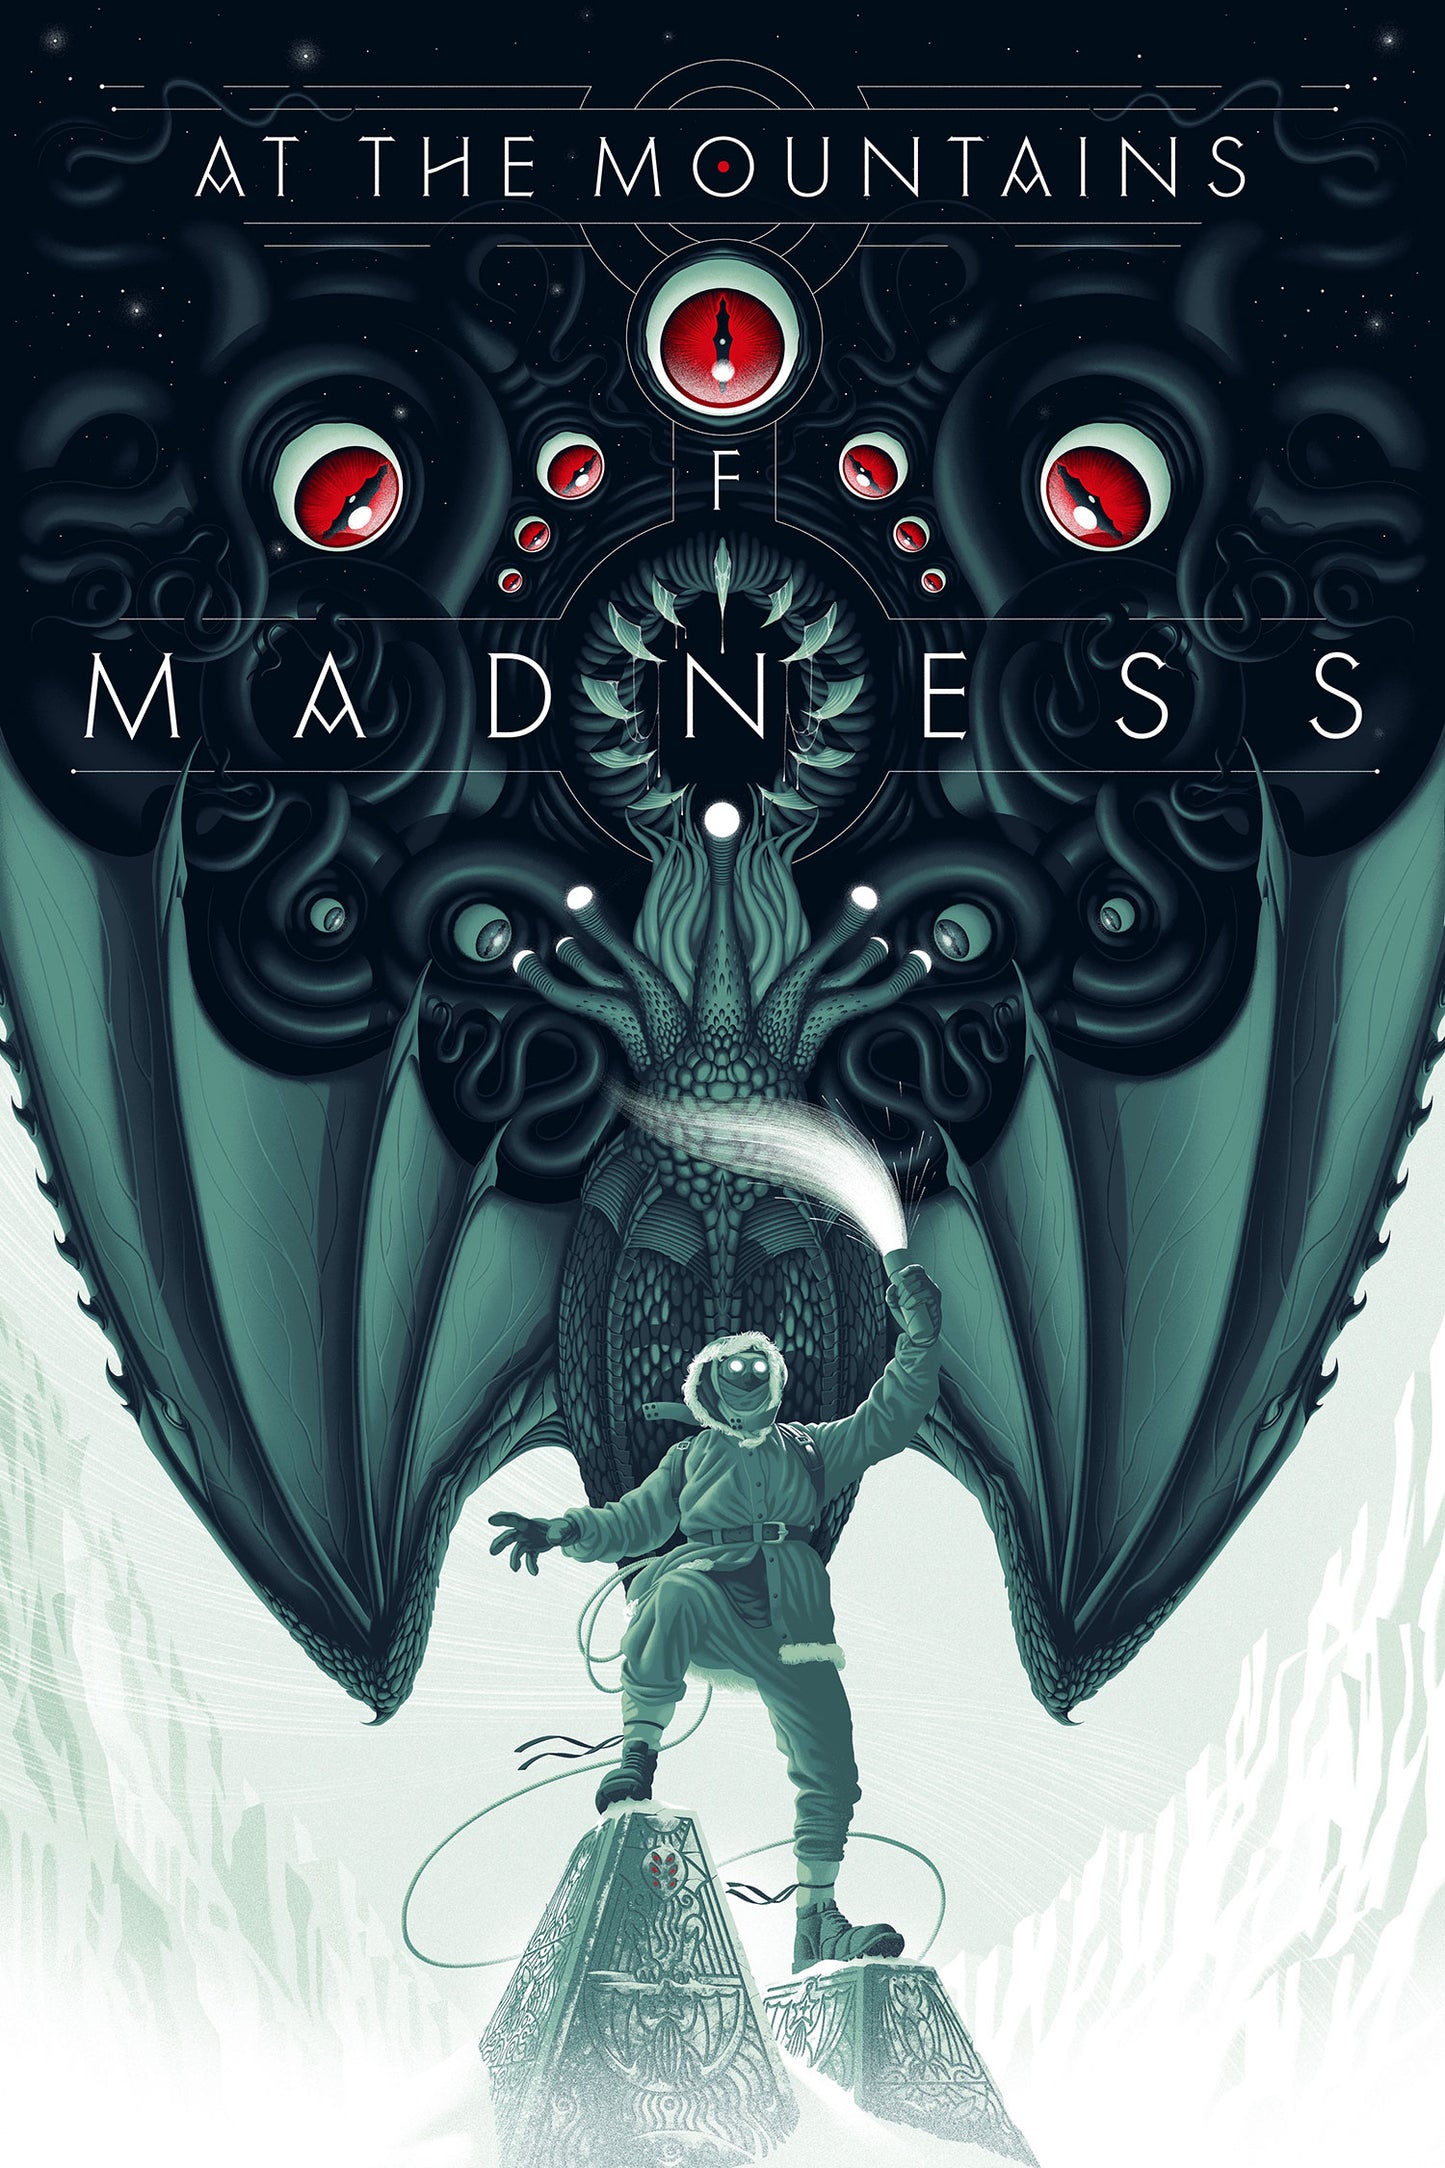 Jay Gordon "At The Mountains of Madness"